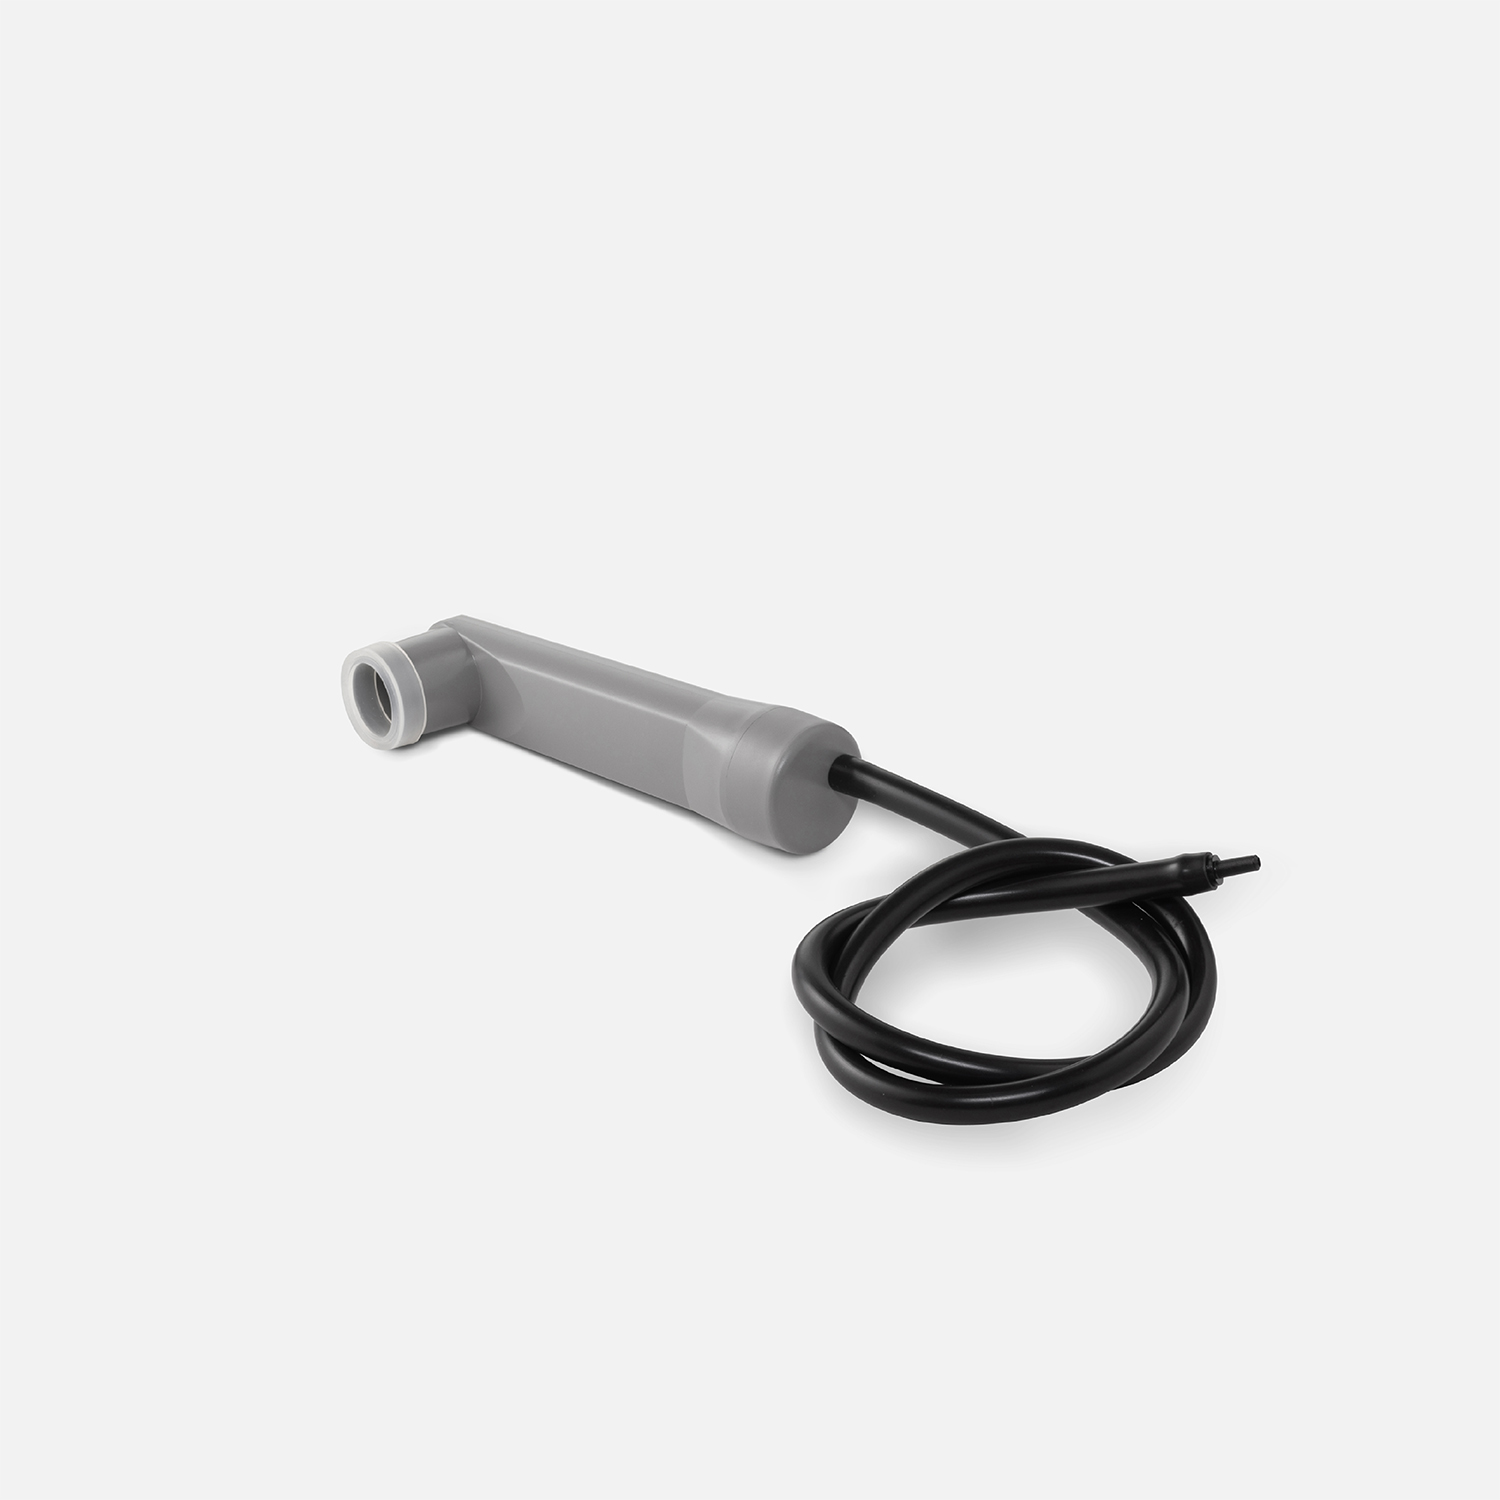 Grey suction device with a black hose for vacuuming containers